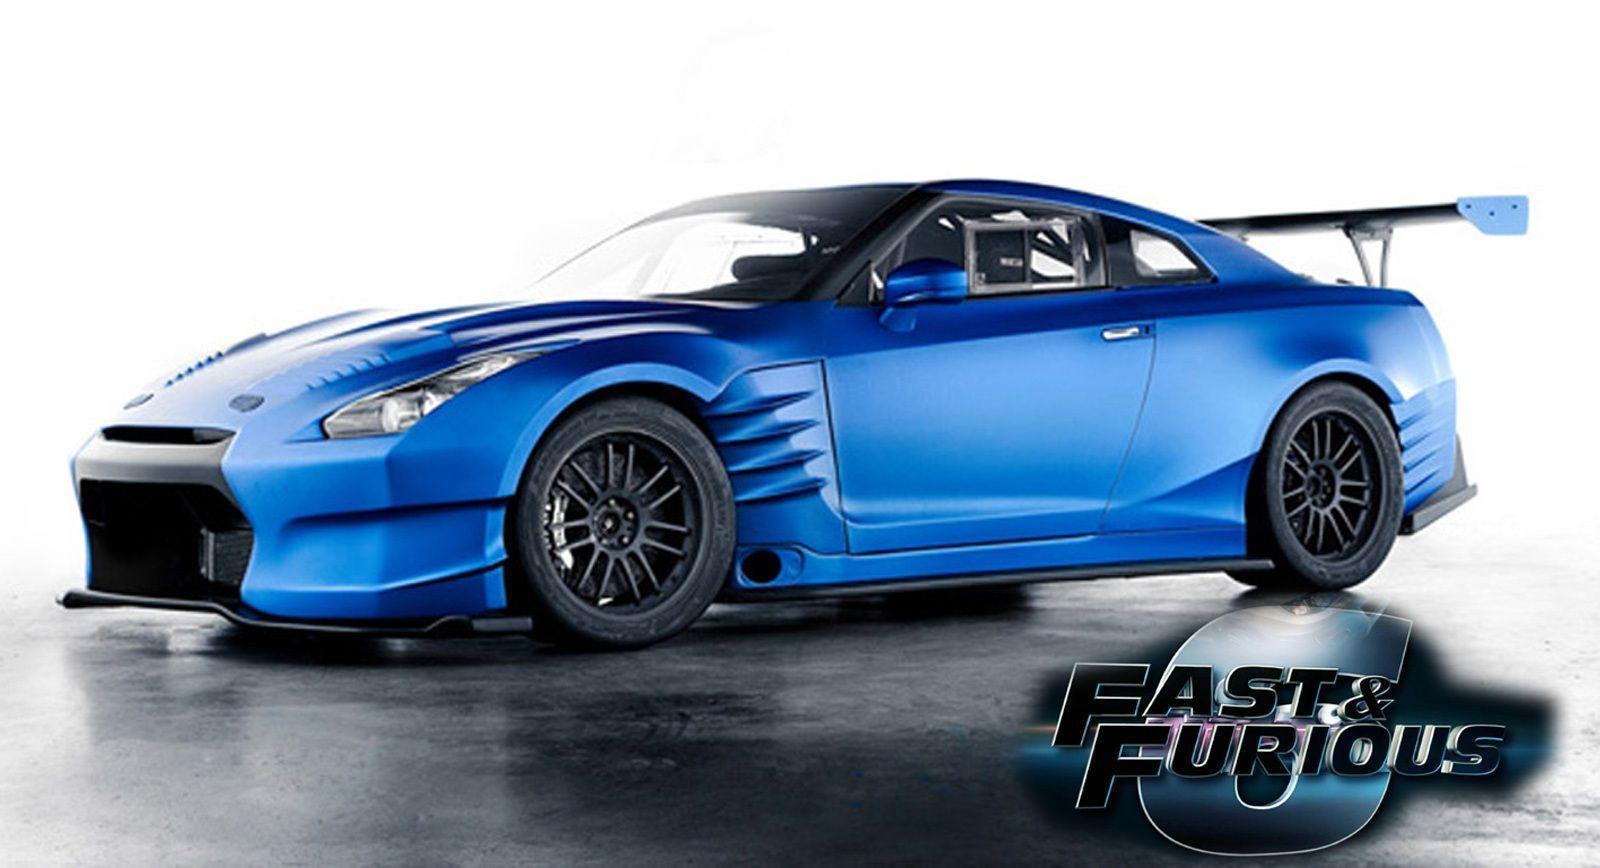 fast and furious 6 car in blue colors